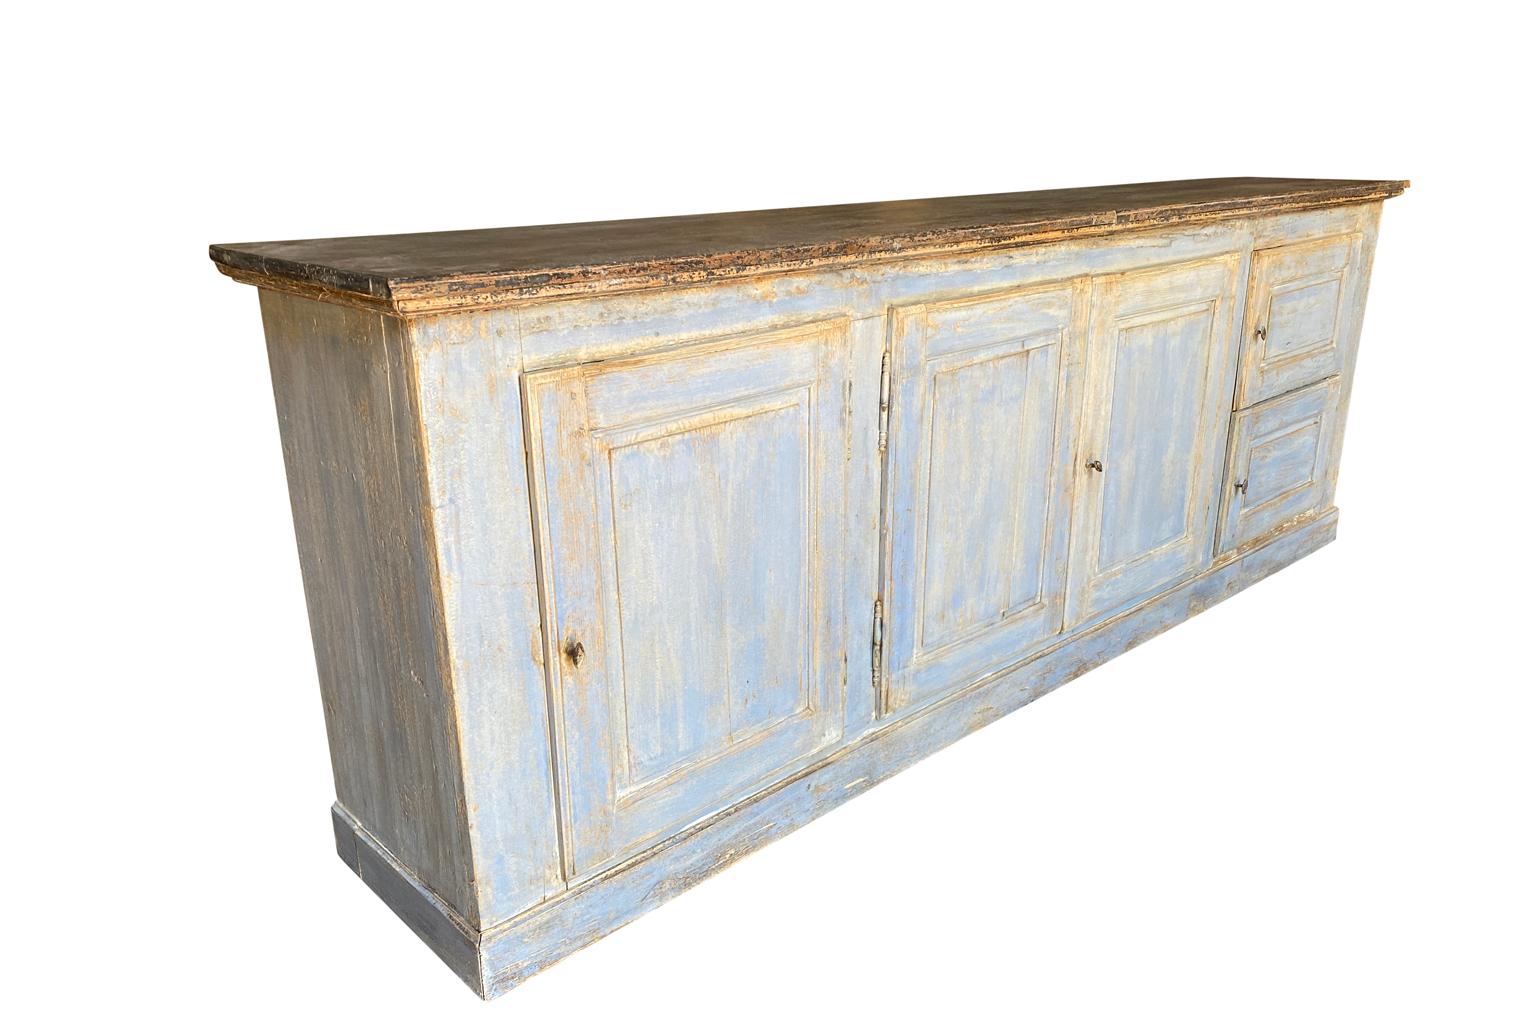 A terrific mid-19th century long enfilade from the Provence region of France. Soundly constructed from painted wood with an interesting configuration of five doors and great patina. Wonderful narrow depth.